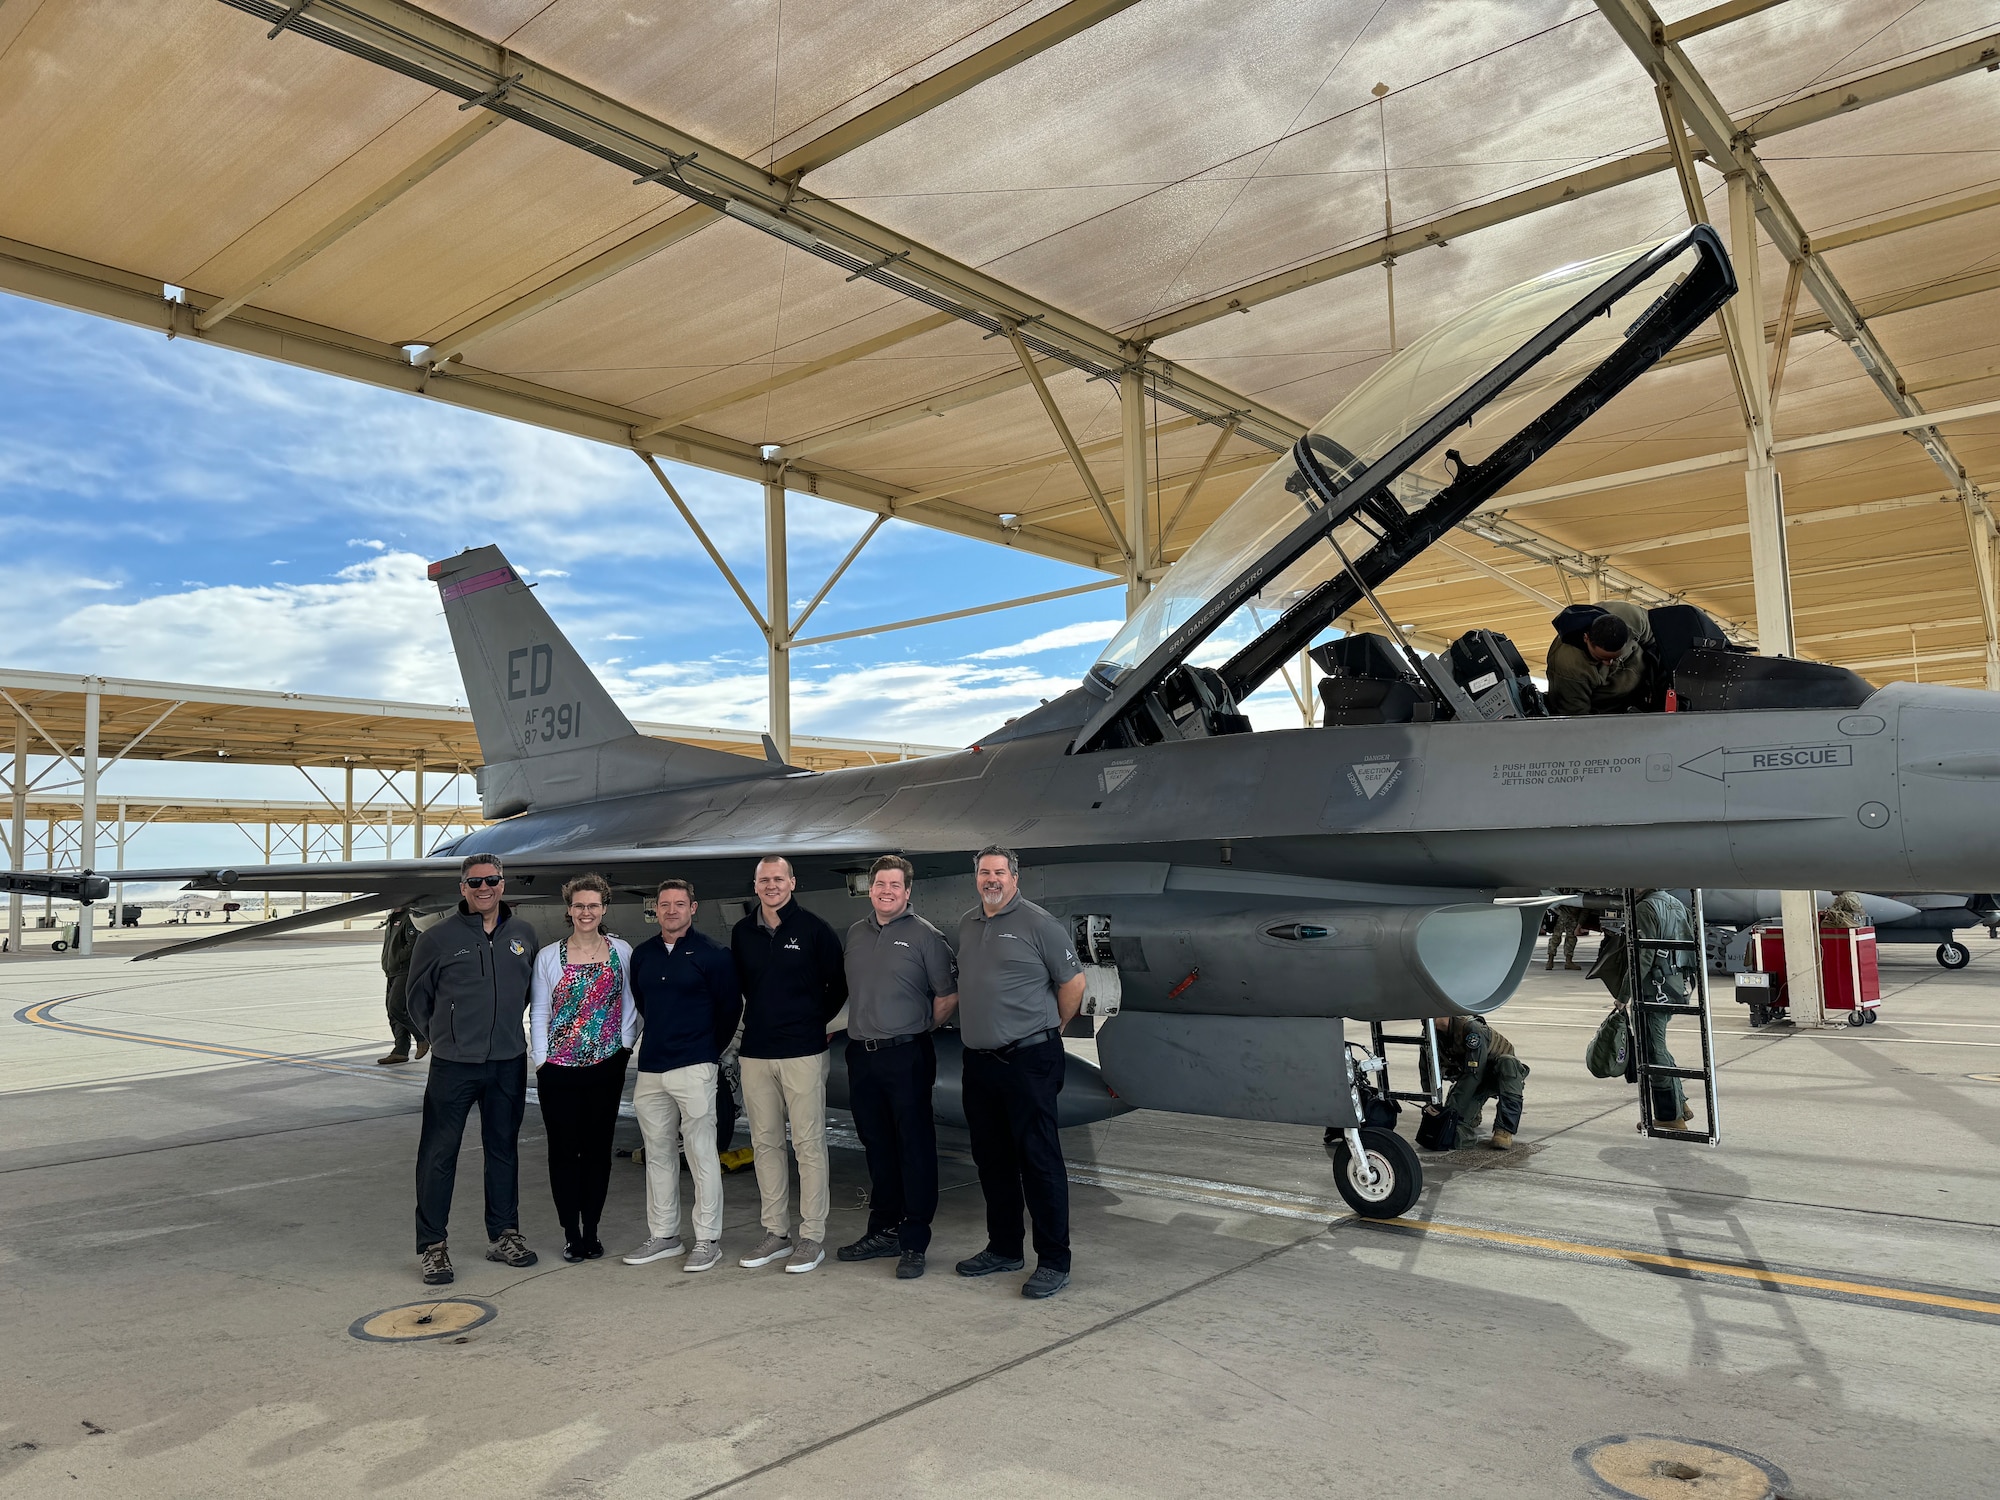 Air Force Research Laboratory, or AFRL, scientists and engineers prepare to watch U.S. Air Force Test Pilot School students test the Integrated Cockpit Sensing, or ICS, system on an F-16 at Edwards Air Force Base, California, March 12, 2024. An AFRL team developed the ICS system to provide an airworthy platform for comprehensive physiological, life-support and environmental monitoring to improve pilot safety and performance. The system has helmet-based, base layer and life-support sensors, ensuring holistic information on the pilot and operating environment during flight. (U.S. Air Force photo / Wei Lee)